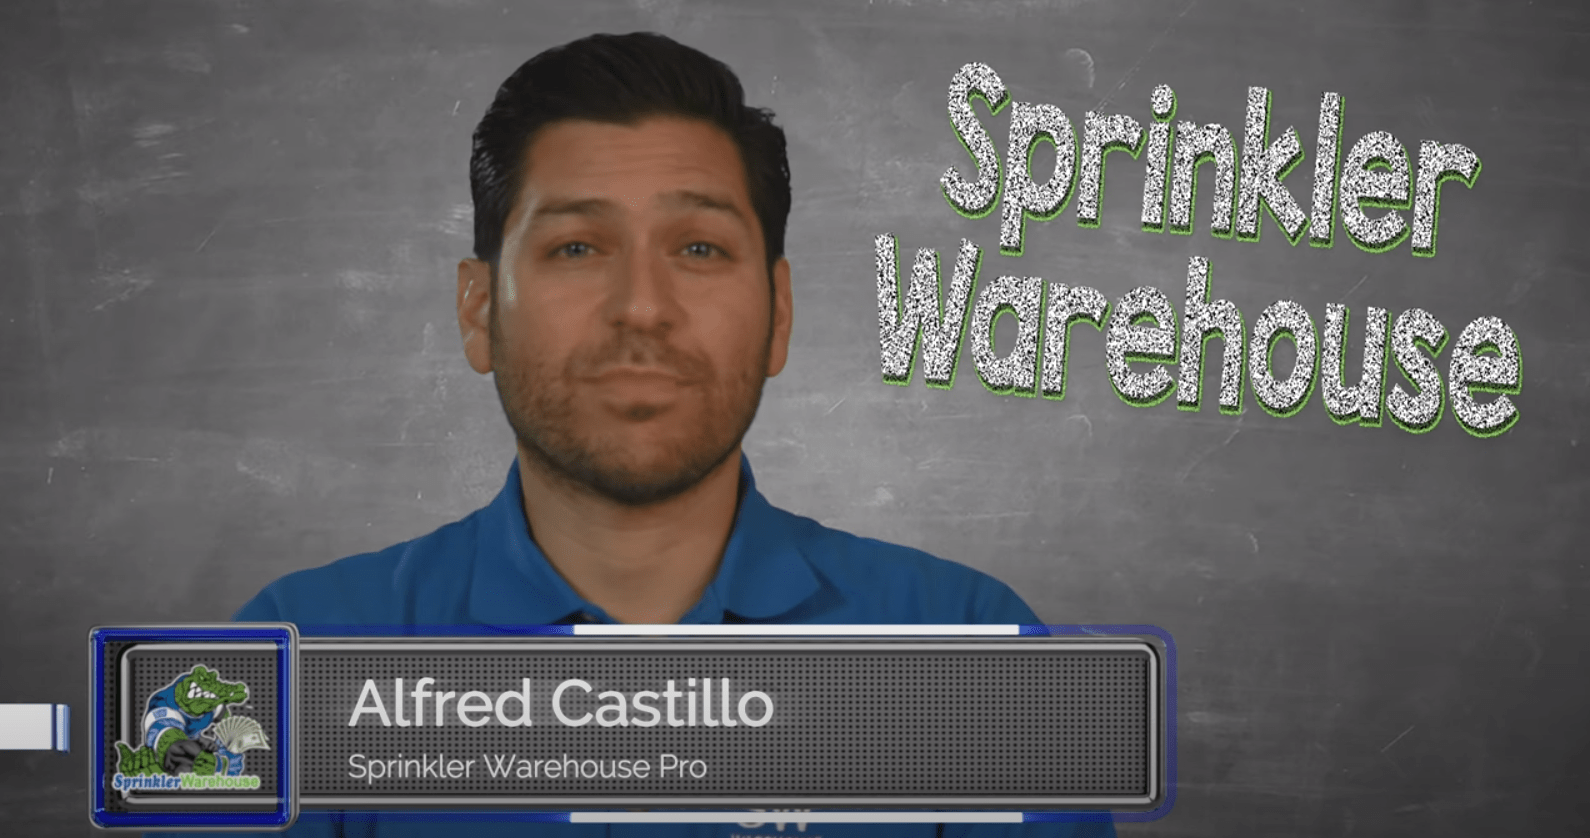 This is a video thumbnail image showing our Sprinkler Warehouse expert.